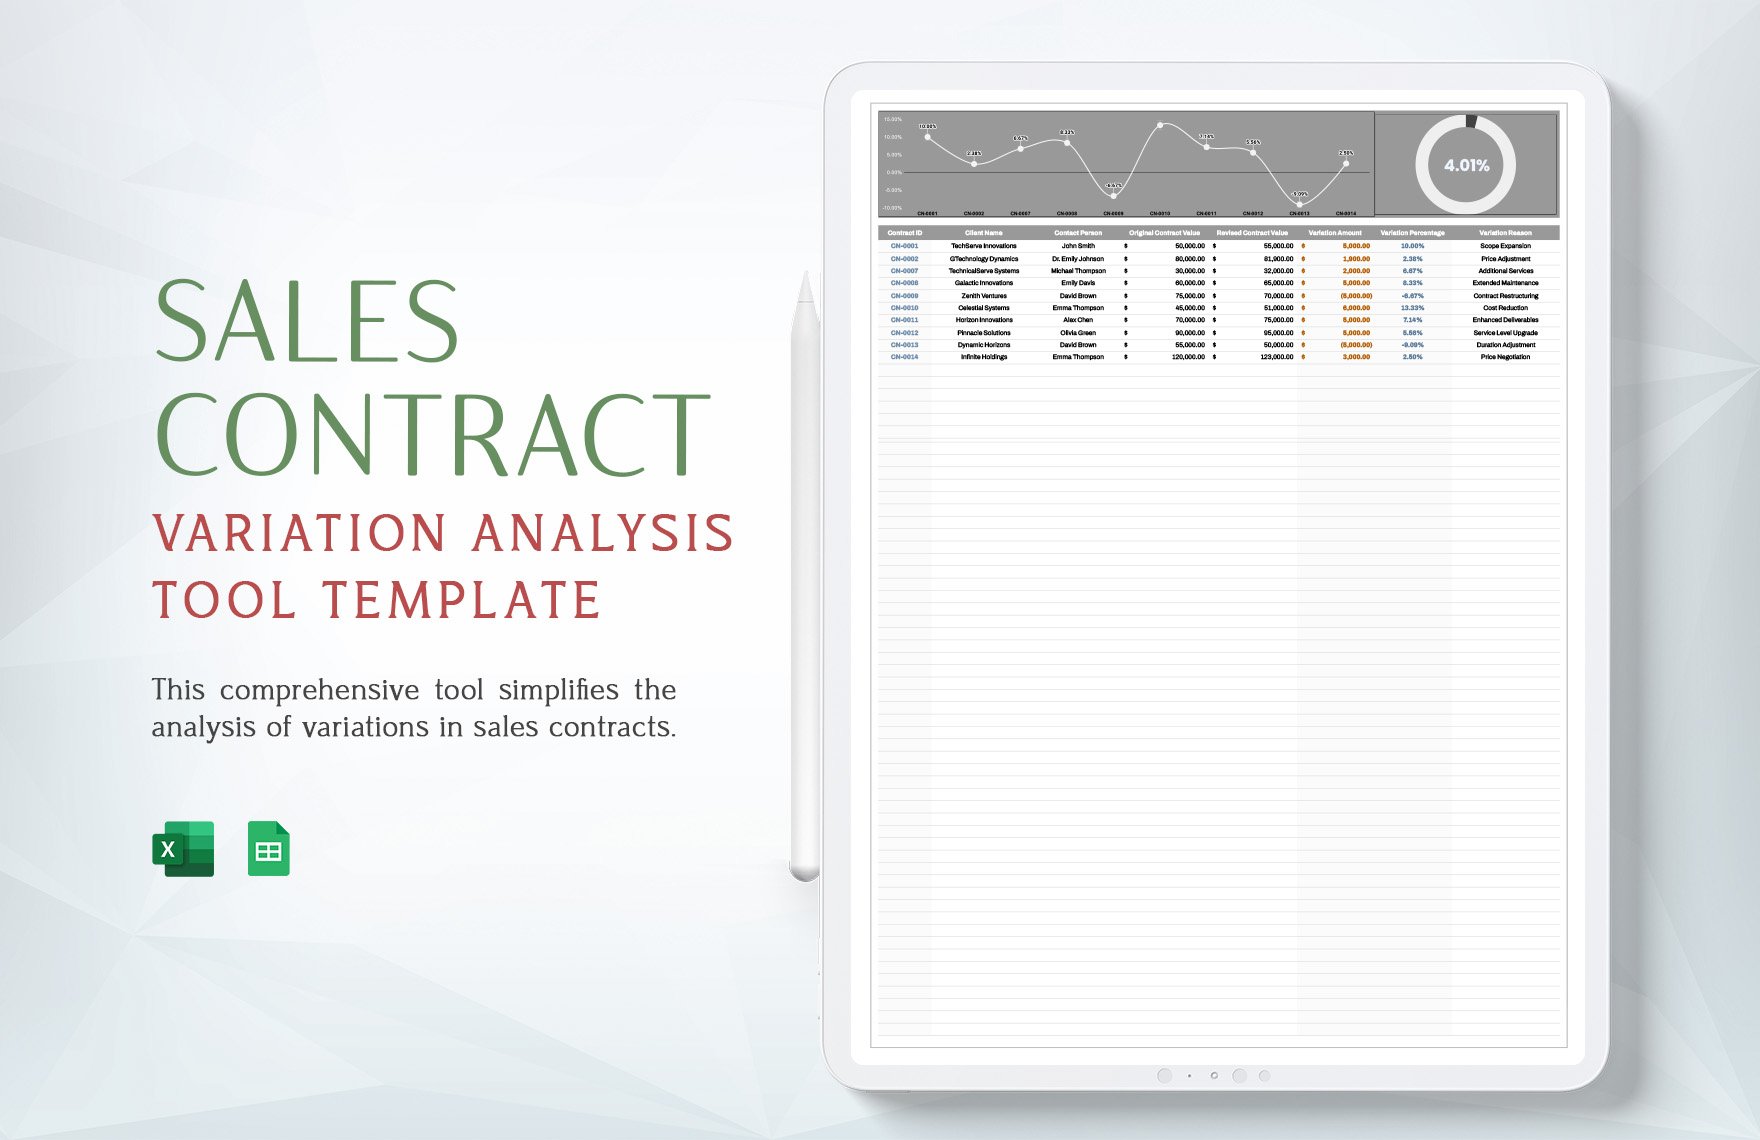 Sales Contract Variation Analysis Tool Template